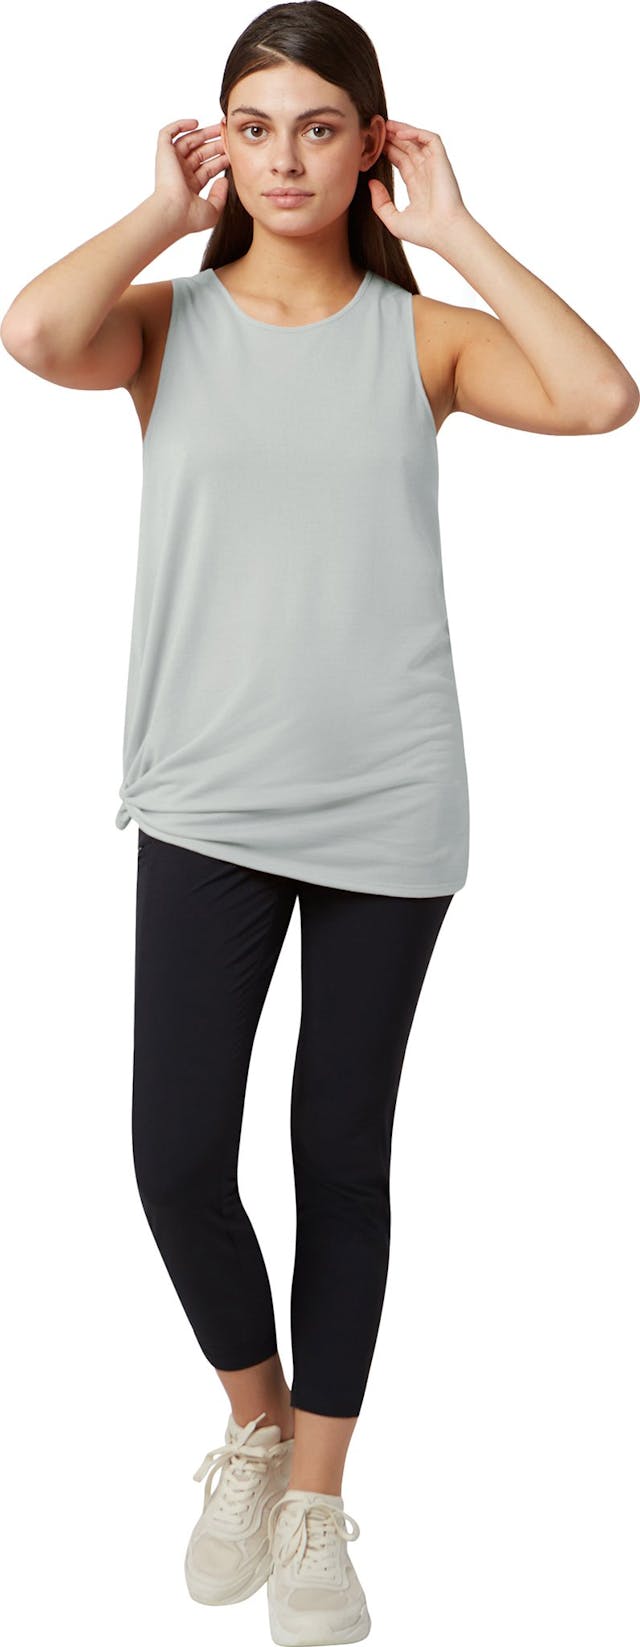 Product image for Mistaya Sleeveless Top - Women's